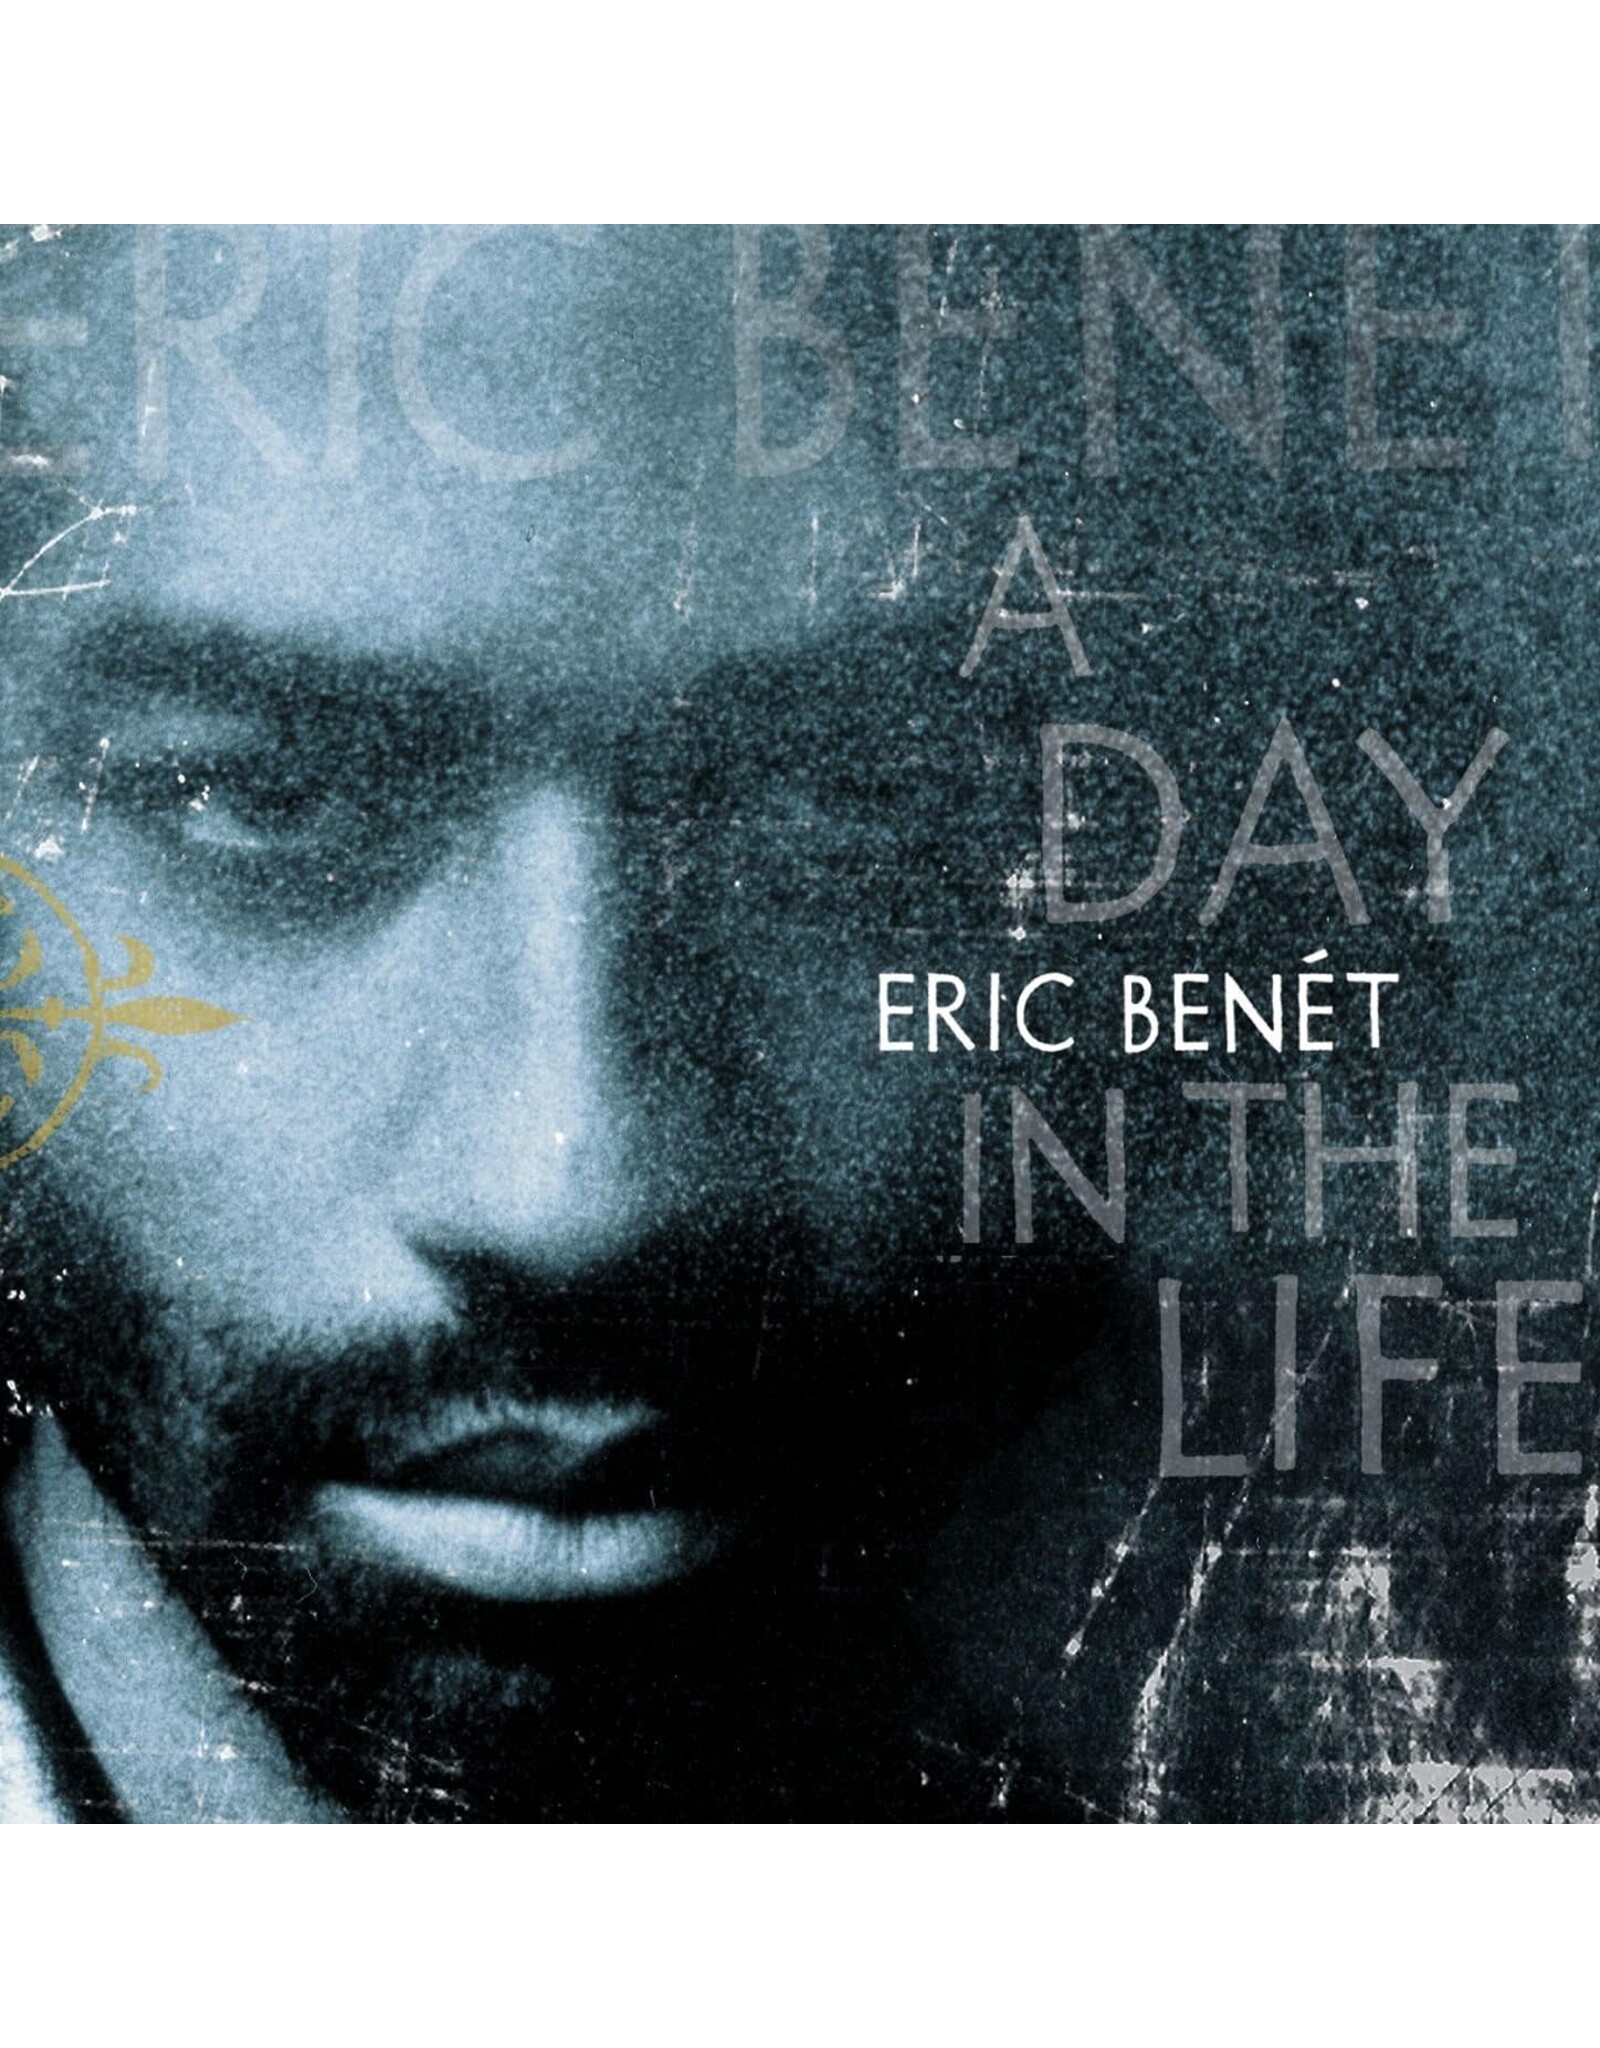 Eric Benet - A Day In The Life (Black Ice Vinyl)